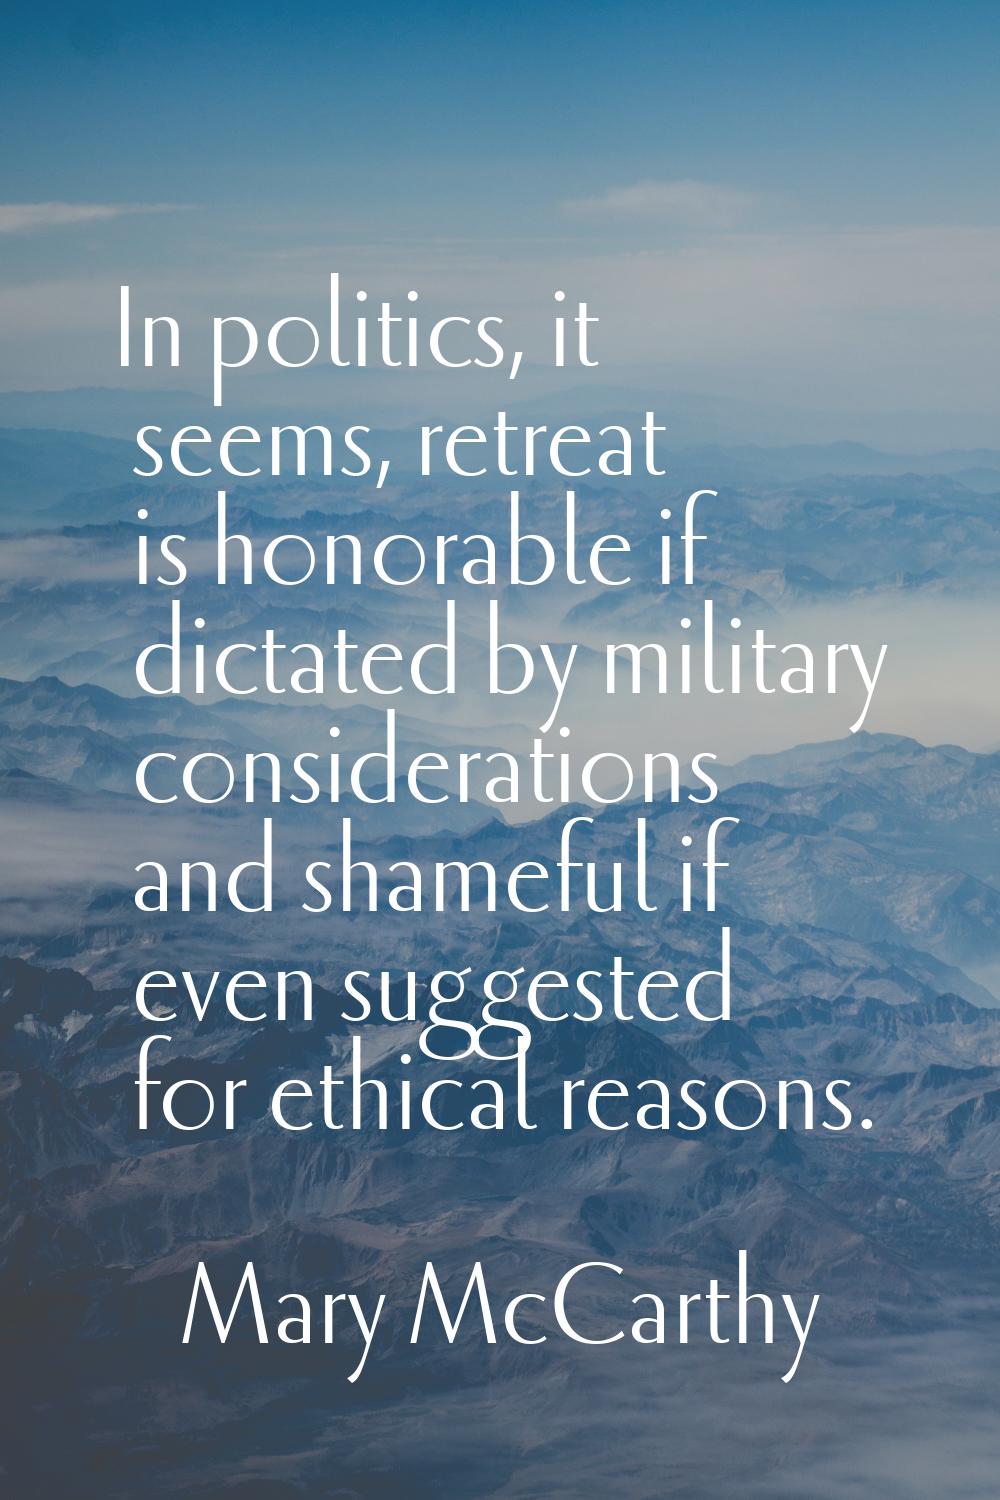 In politics, it seems, retreat is honorable if dictated by military considerations and shameful if 